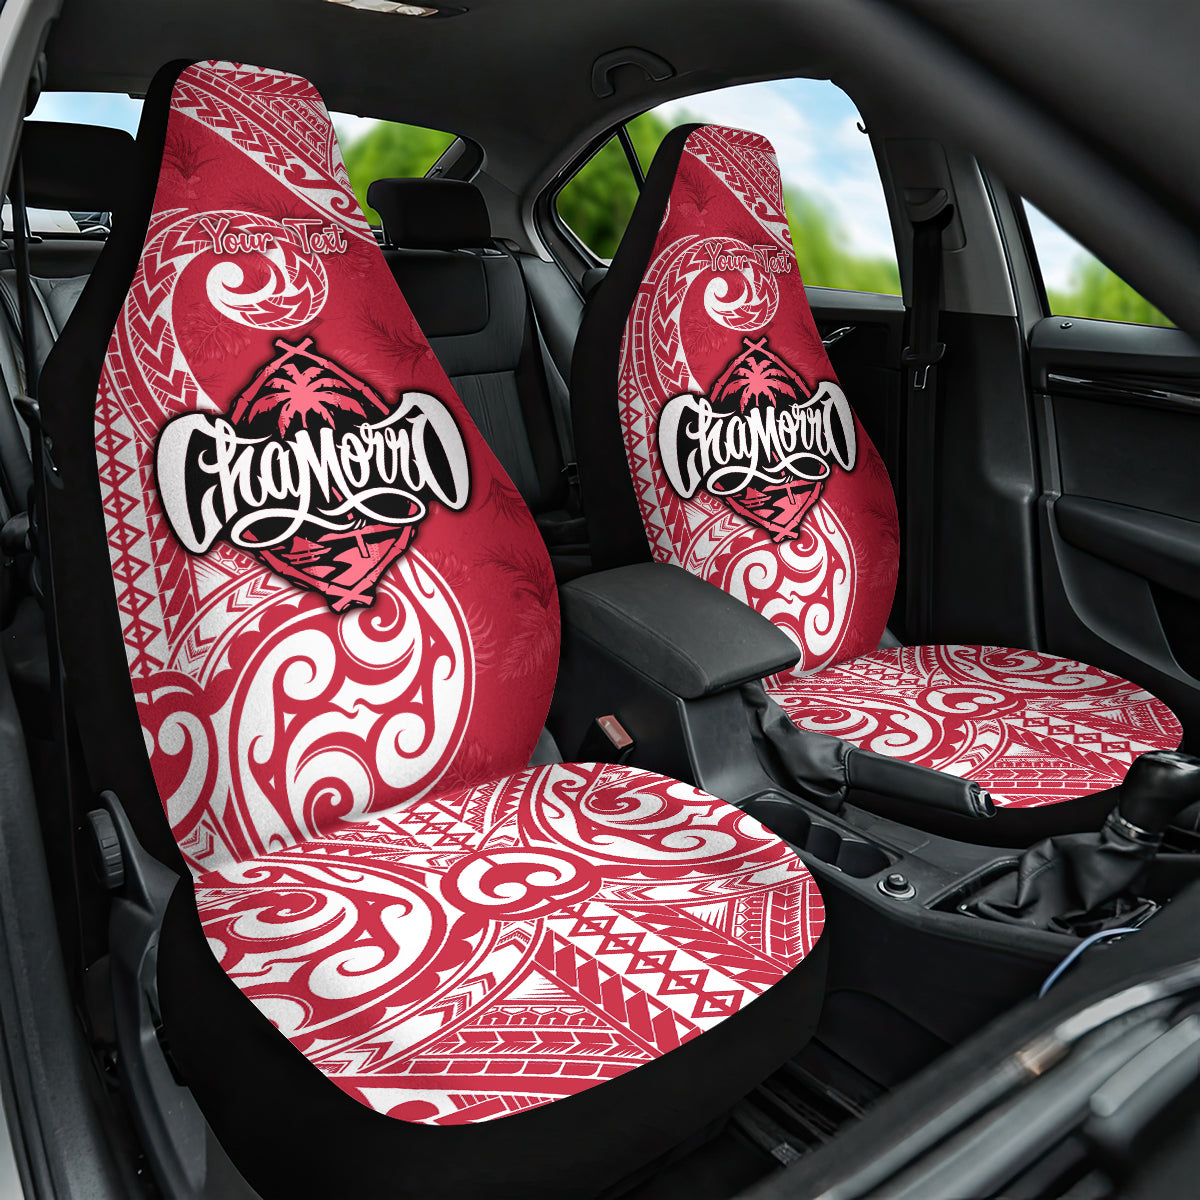 Personalised Hafa Adai Guam History and Chamorro Heritage Day Car Seat Cover Red Latte Stone LT05 One Size Red - Polynesian Pride